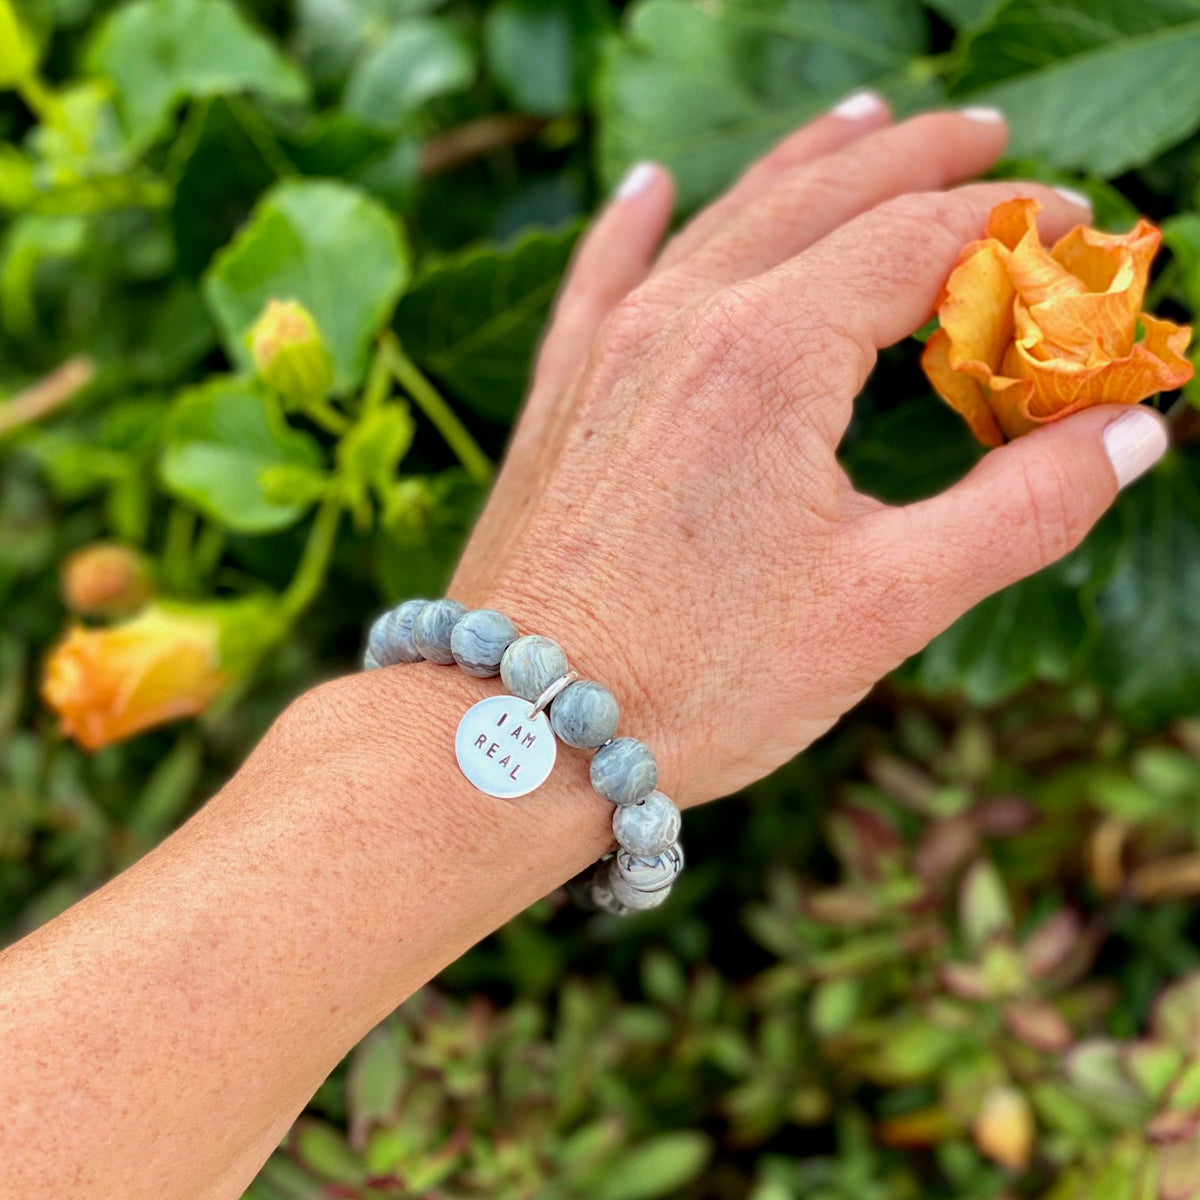 I am Real Affirmation Bracelet with Jasper to Help Stabilize your Mood Swings. "To be yourself in a world that is constantly trying to make you something else is the greatest accomplishment." Ralph Waldo Emerson. Trying to please EVERYONE is a recipe for frustration. Be yourself, be real and you will be happier.